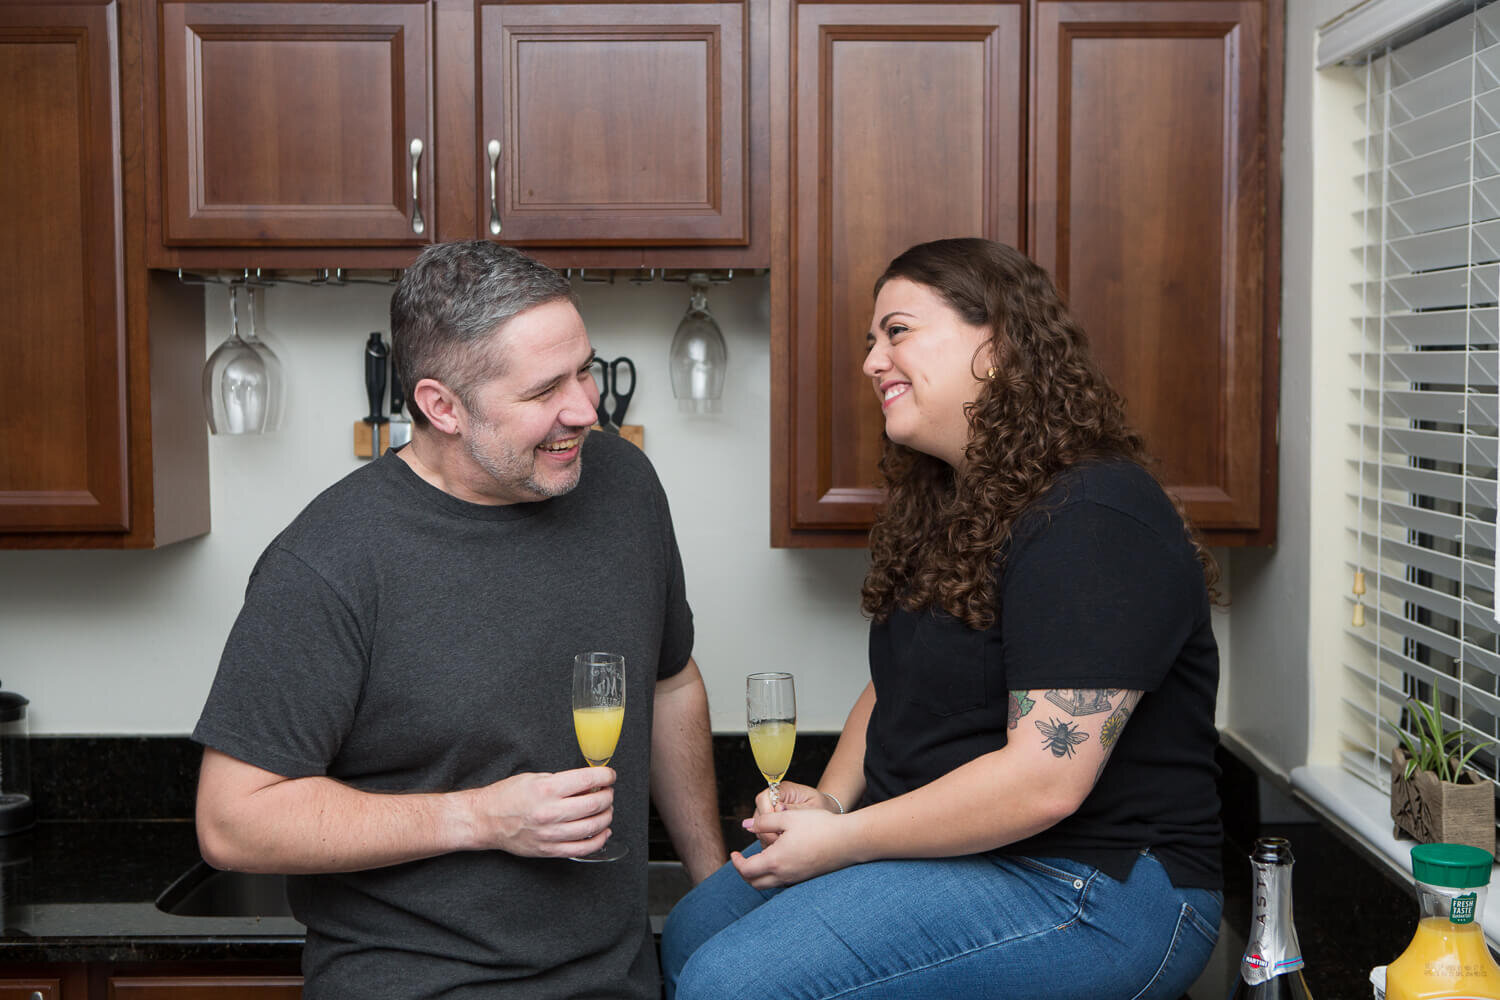  At home lifestyle engagement photos in Orlando, Florida 